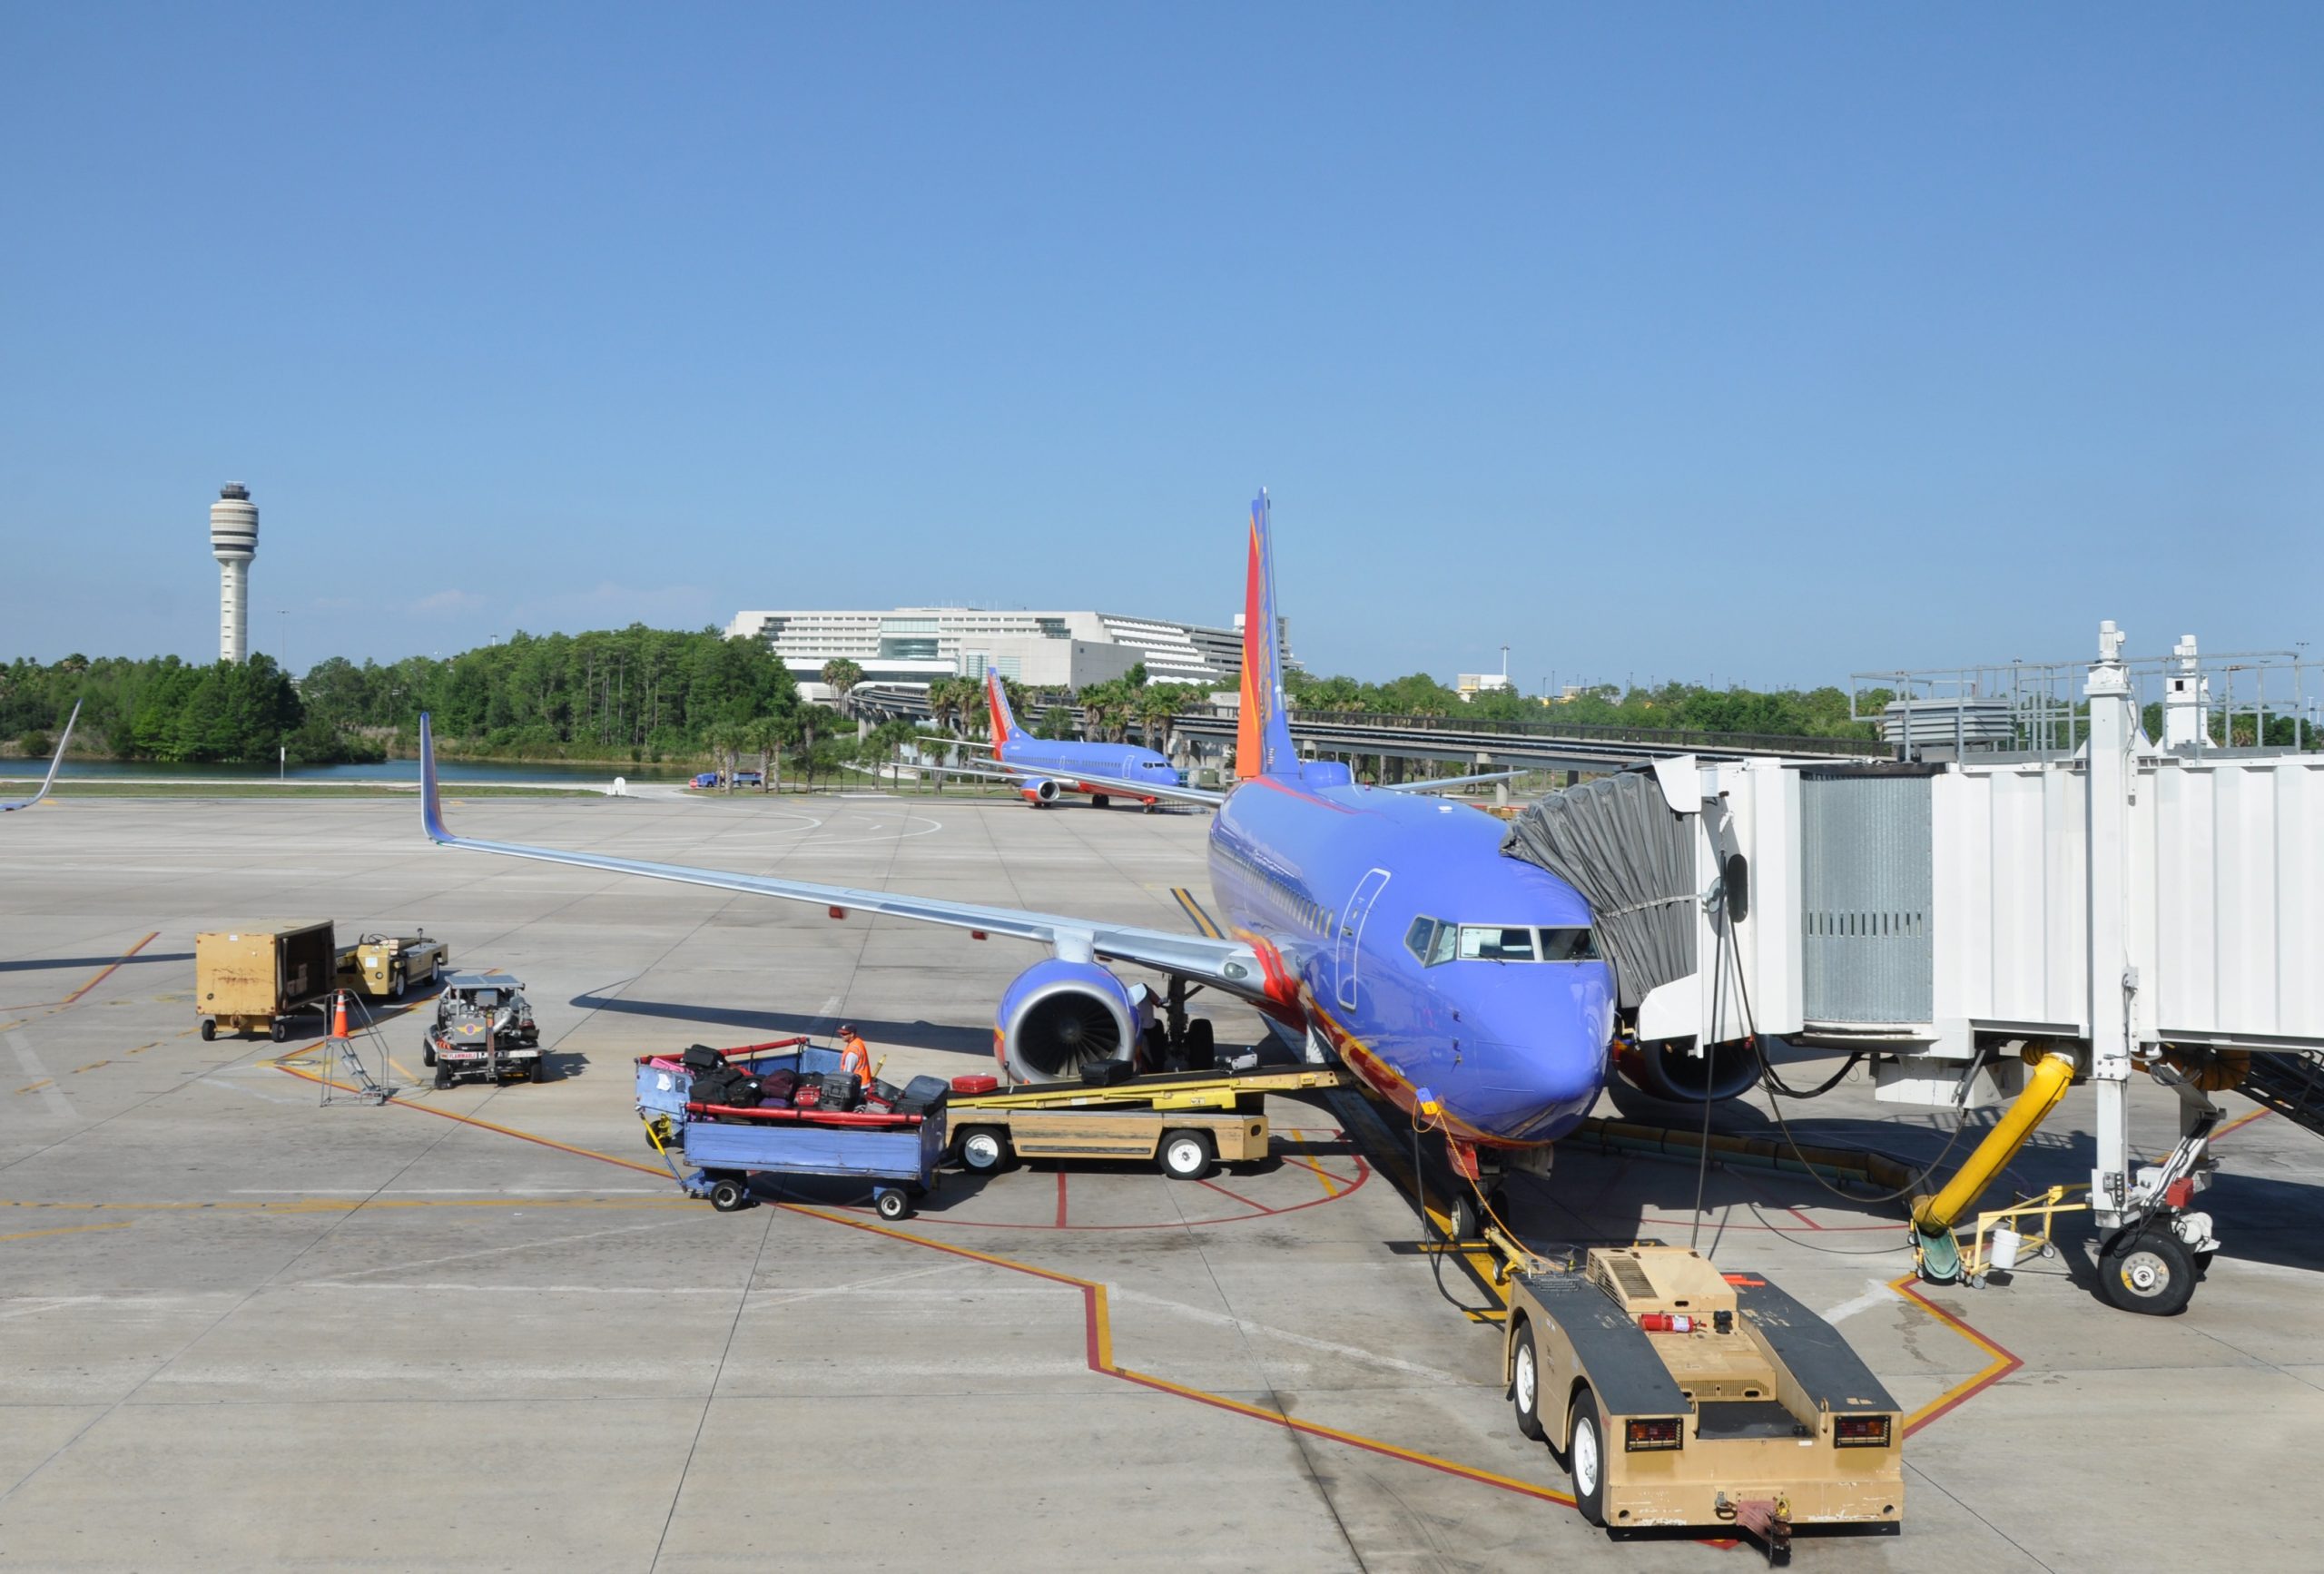 Baggage being loaded onto a Southwest plane on the tarmac